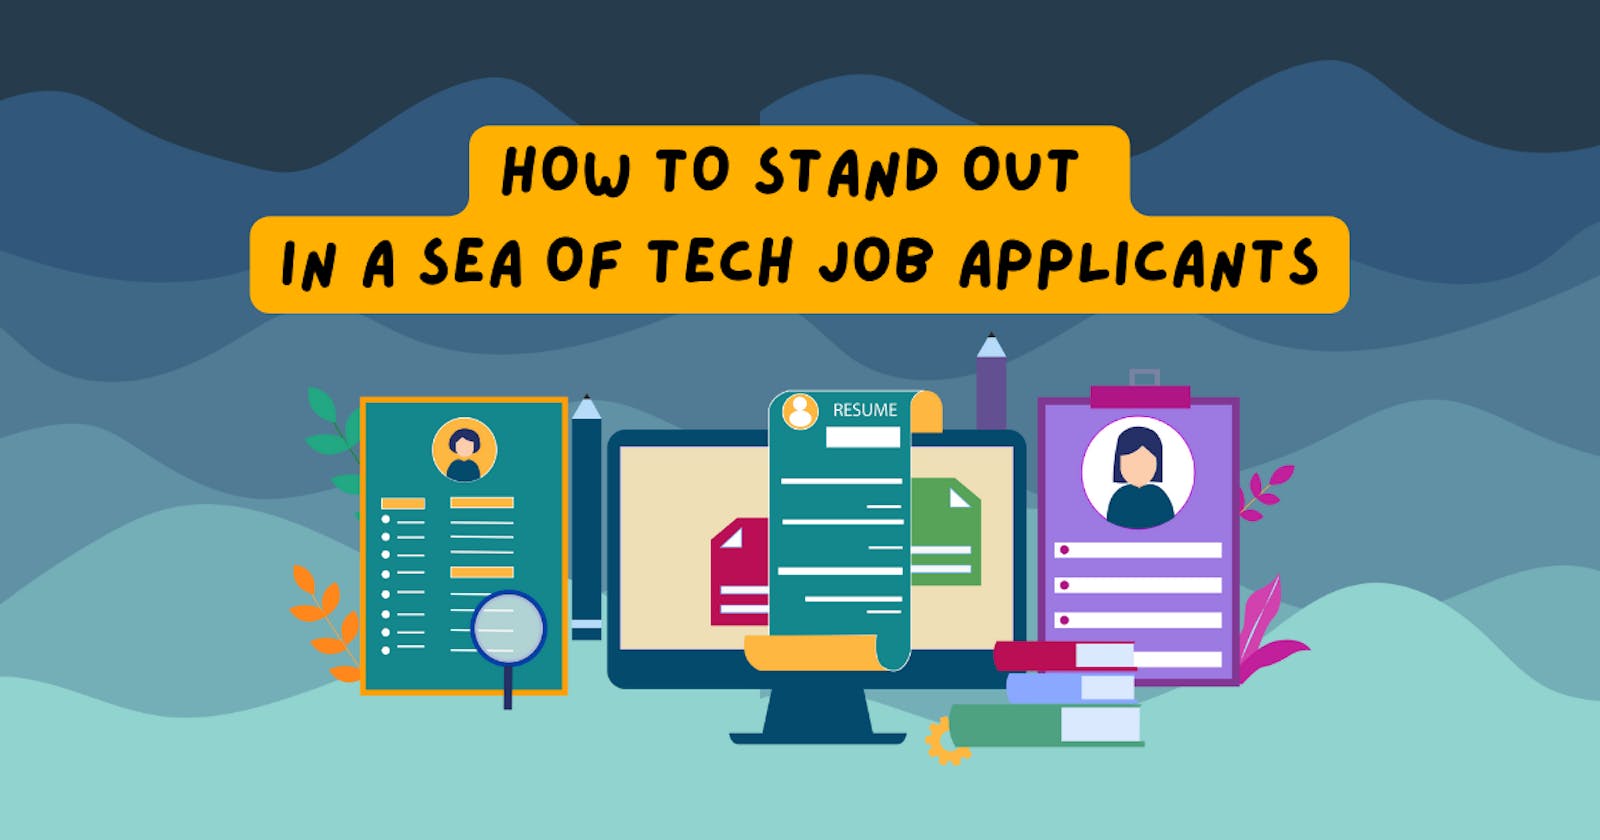 How To Stand Out In A Sea of Tech Job Applicants